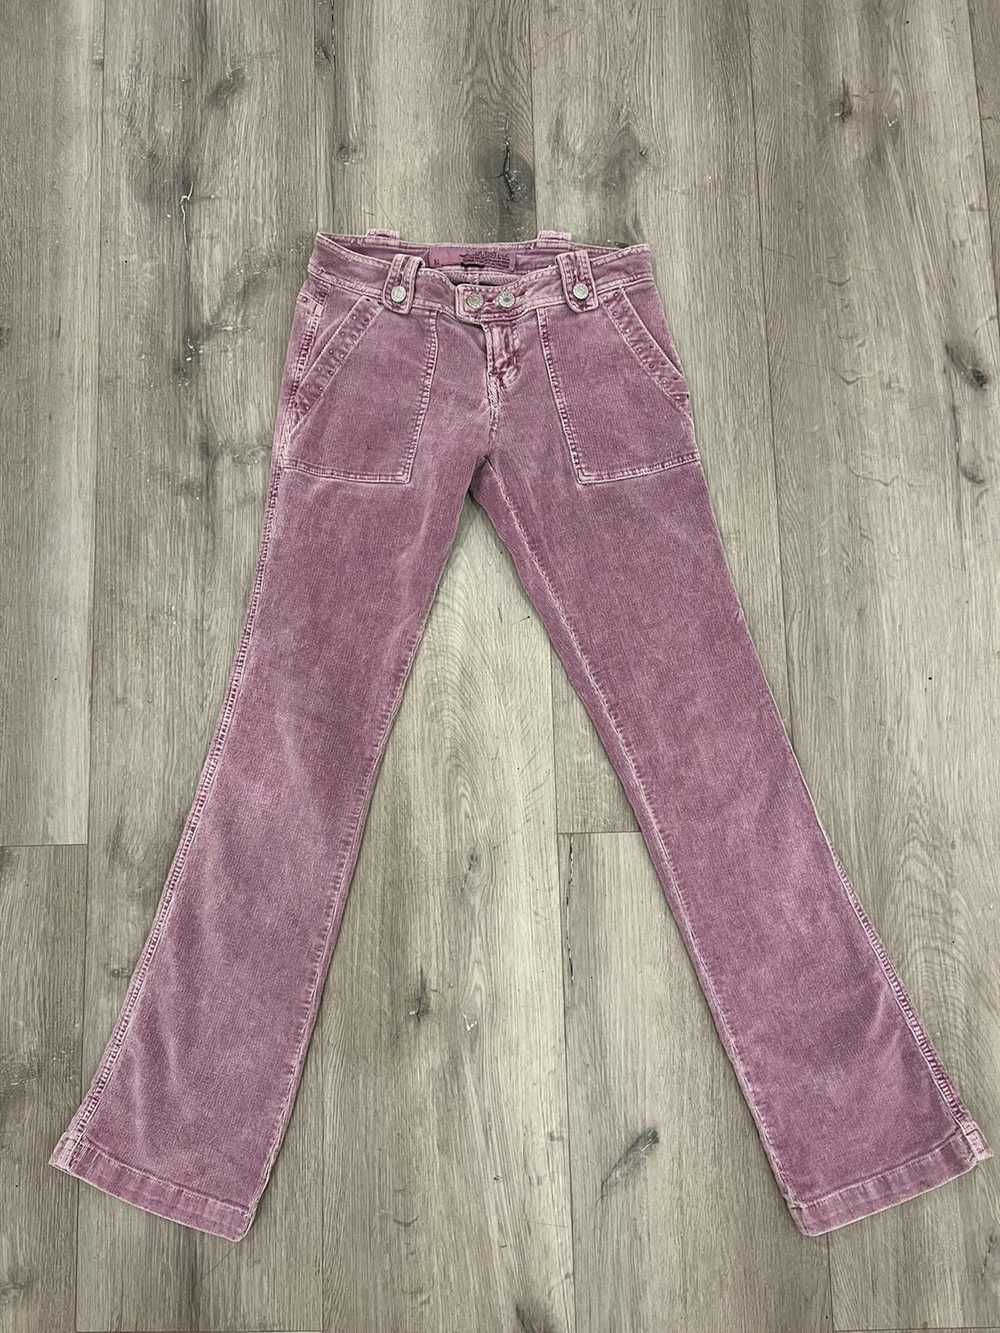 Guess × Vintage Pink Guess Bootcut Jeans - image 1